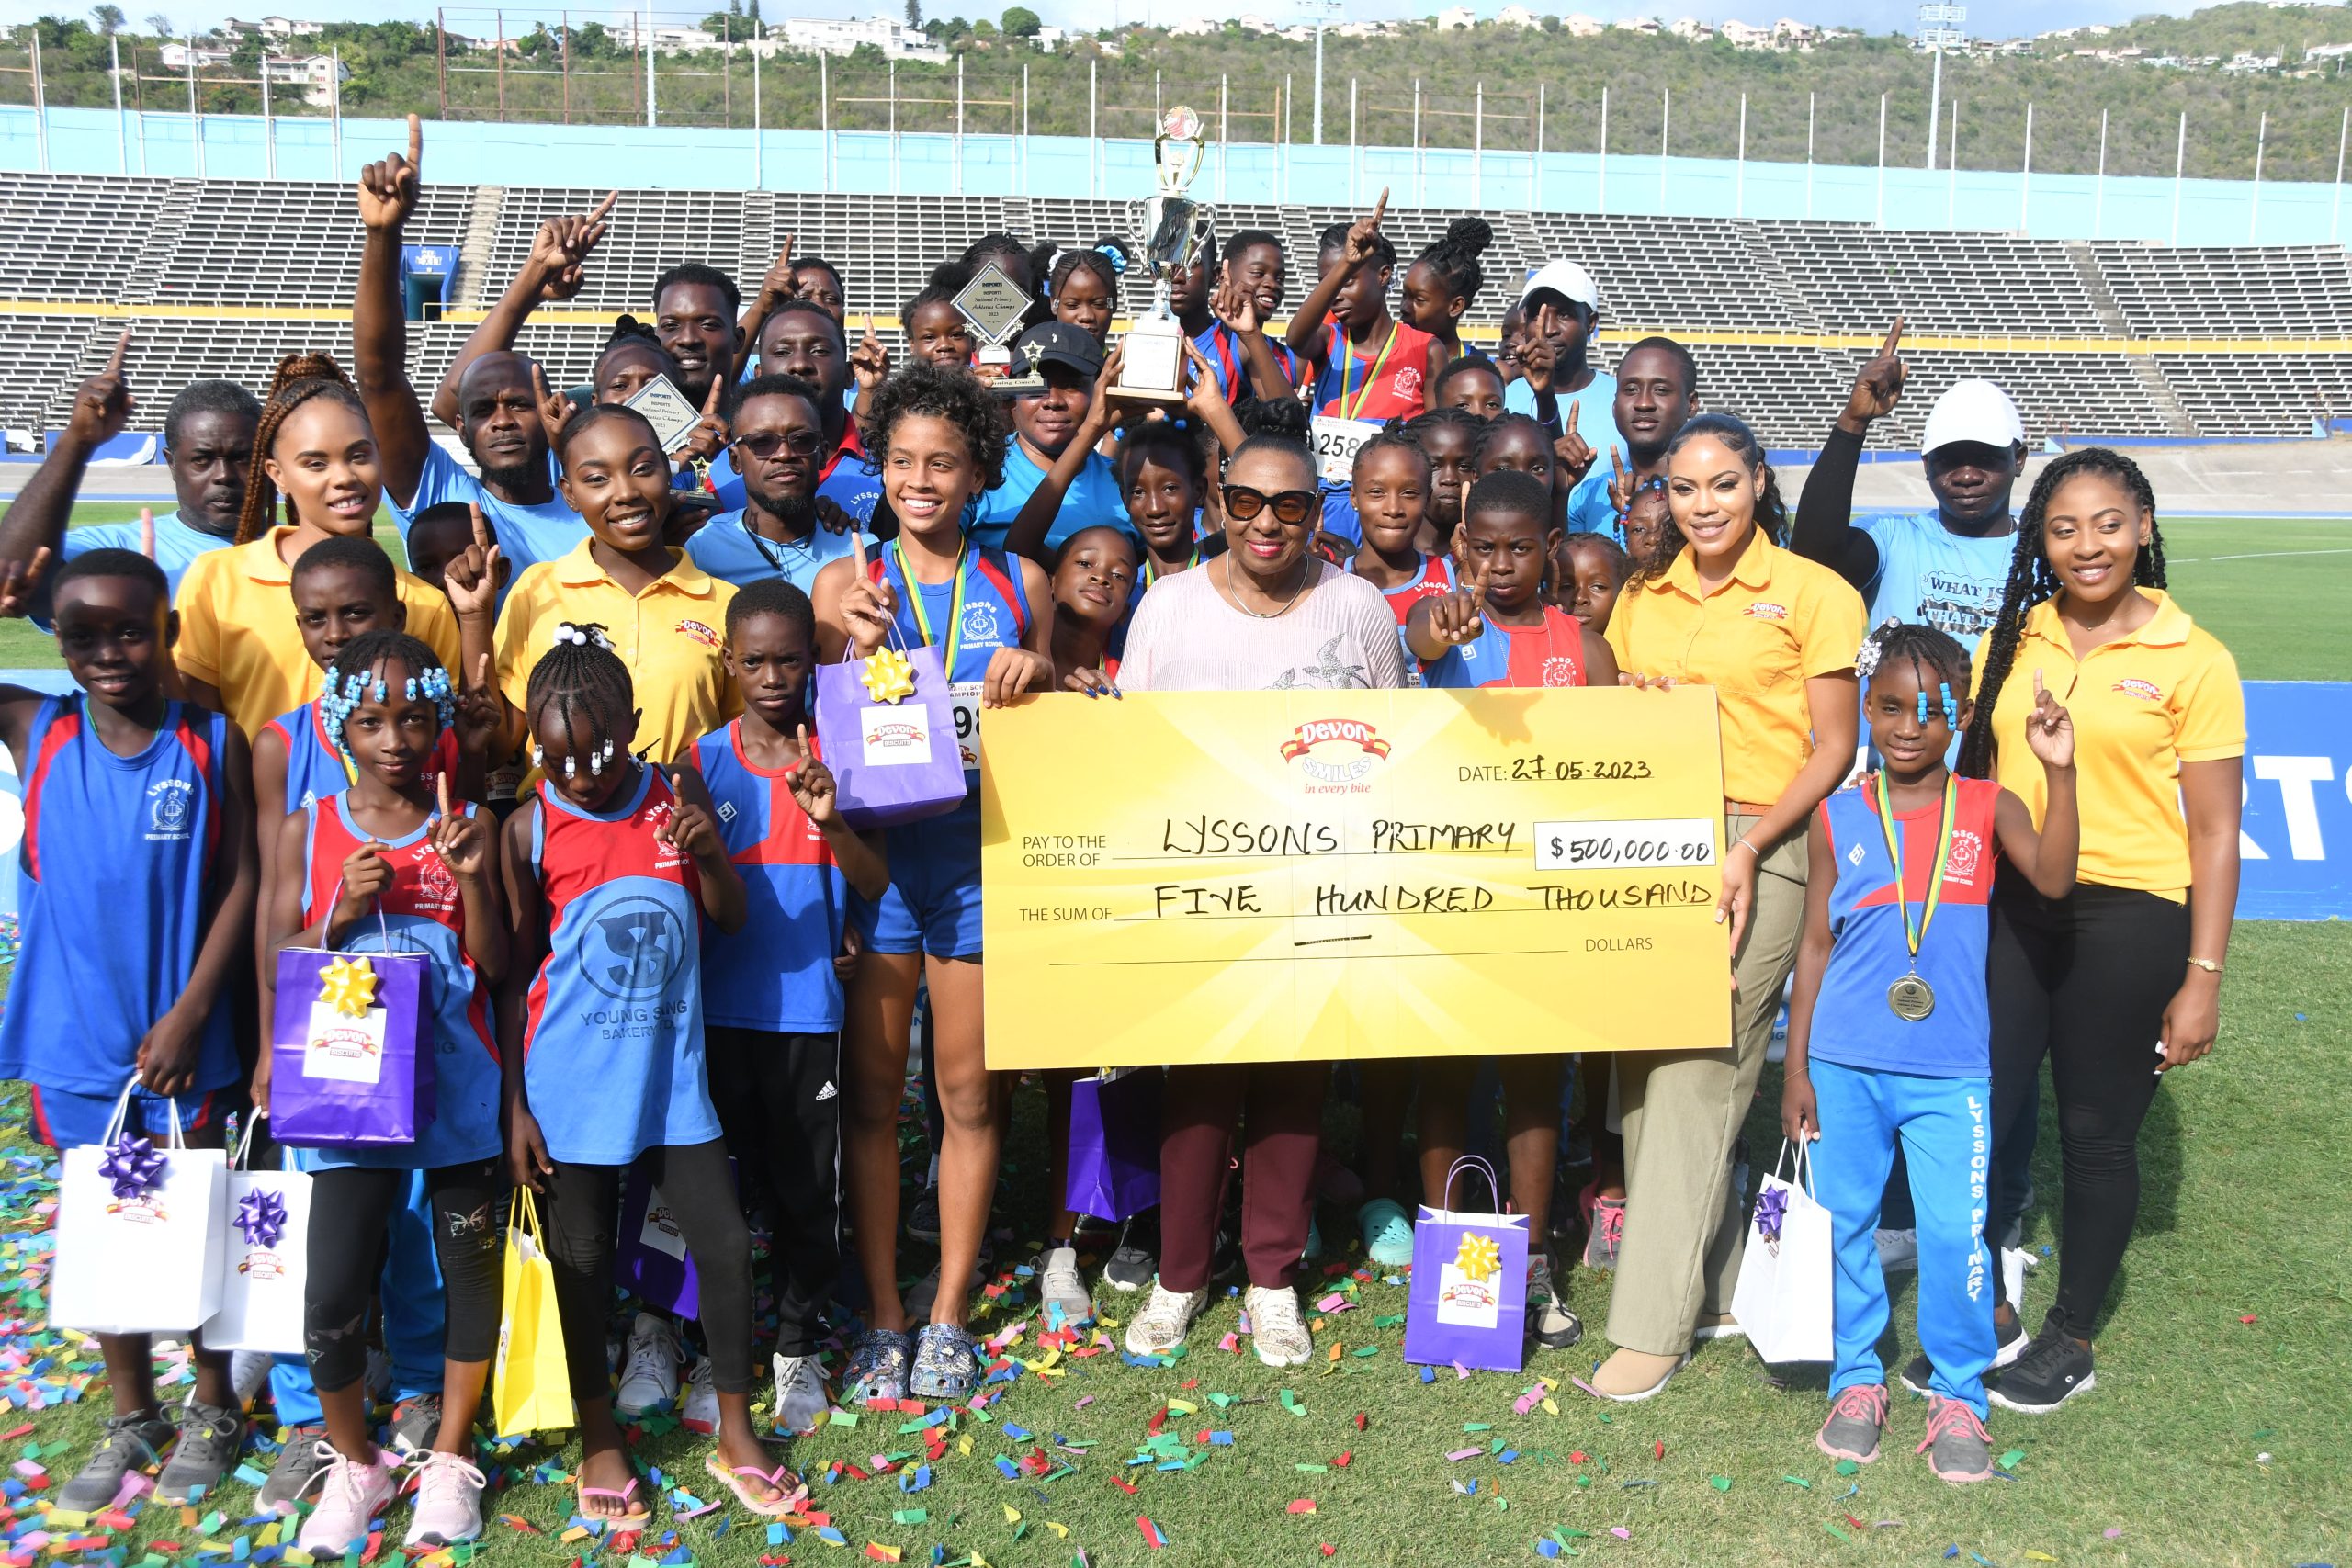 Minister of Culture, Gender, Entertainment and Sports, the Honourable Olivia Grange along with Devon Biscuits brand manager Sherene Bryan presented the INSPORTS/Devon Biscuits National Primary schools winning trophy to champions Lyssons Primary school.